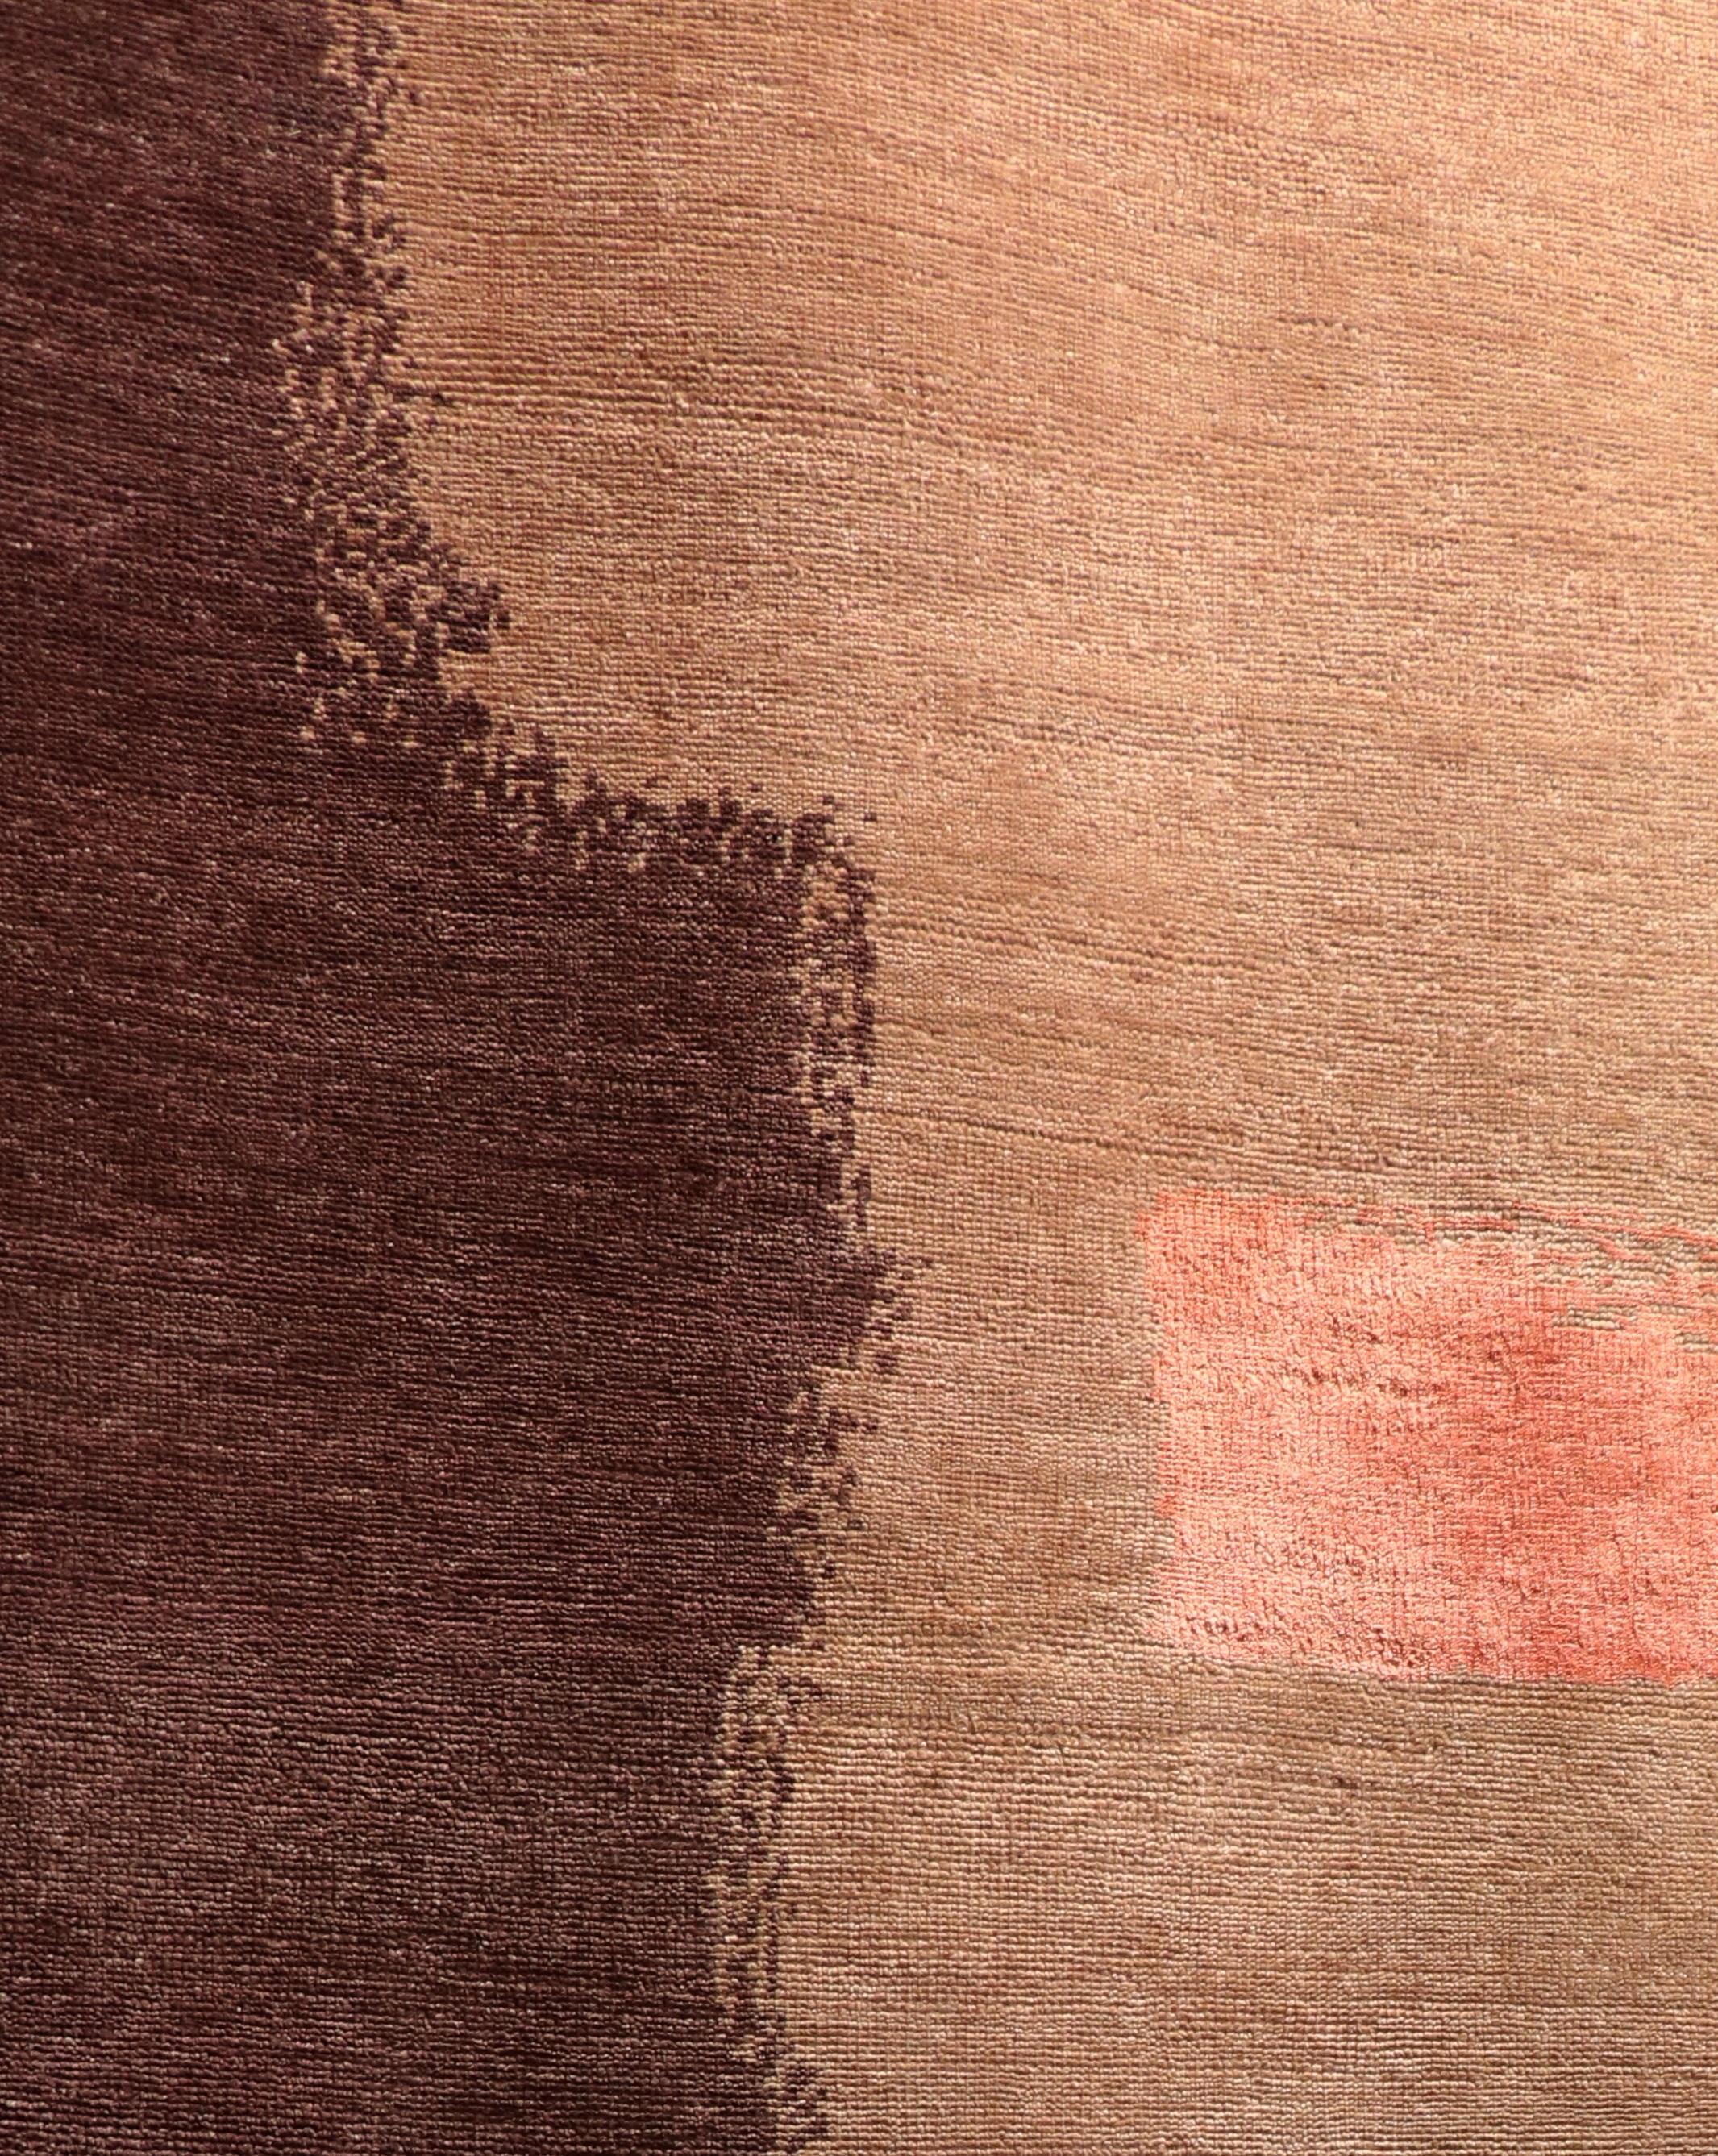 Contemporary Design Rug Burgundy Peach and Coral Hand-Knotted Wool in Stock 6